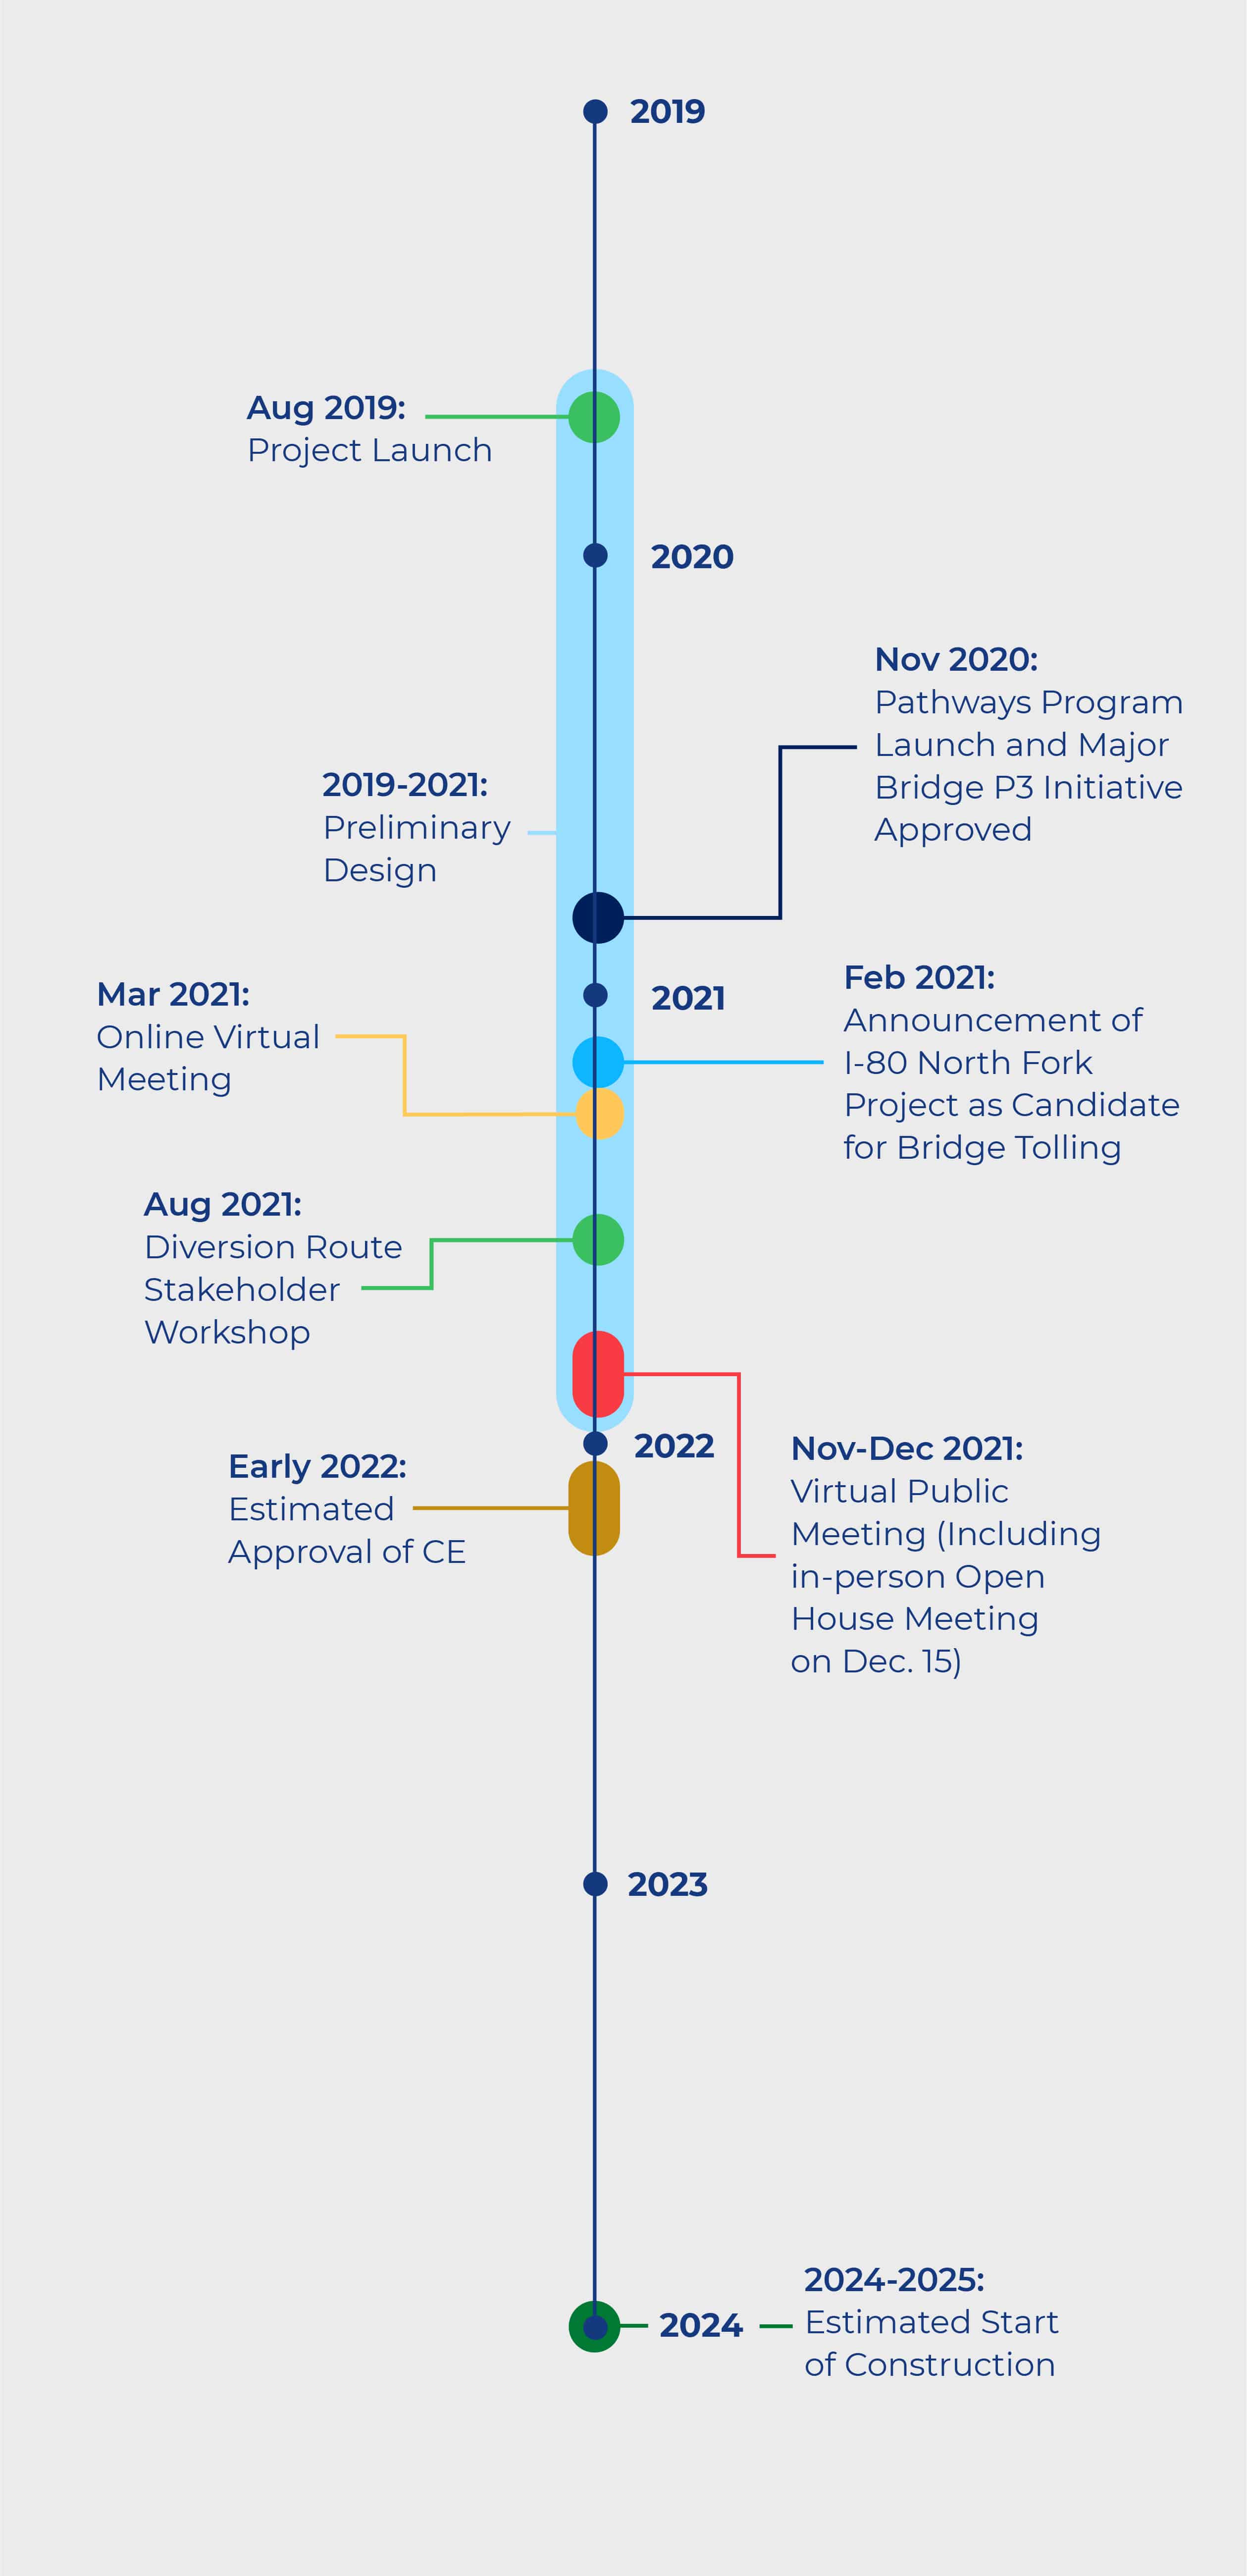 Timeline: Project launch in August 2019. Preliminarydesign in 2019-2021. Pathways Program launches and Major Bridge P3 initiative approved in November 2020. Announcement of I-80 North Fork Project as candidate for bridge tolling in Feburary 2021. Online virtual meeting in March 2021. Diversion route stakeholder workshop in August 2021. Virtual public meeting (including in-person open huse meeting on Dec. 15) in November-December 2021. Estimated approval of CE in early 2022. Estimated start of construction in 2024-2025.